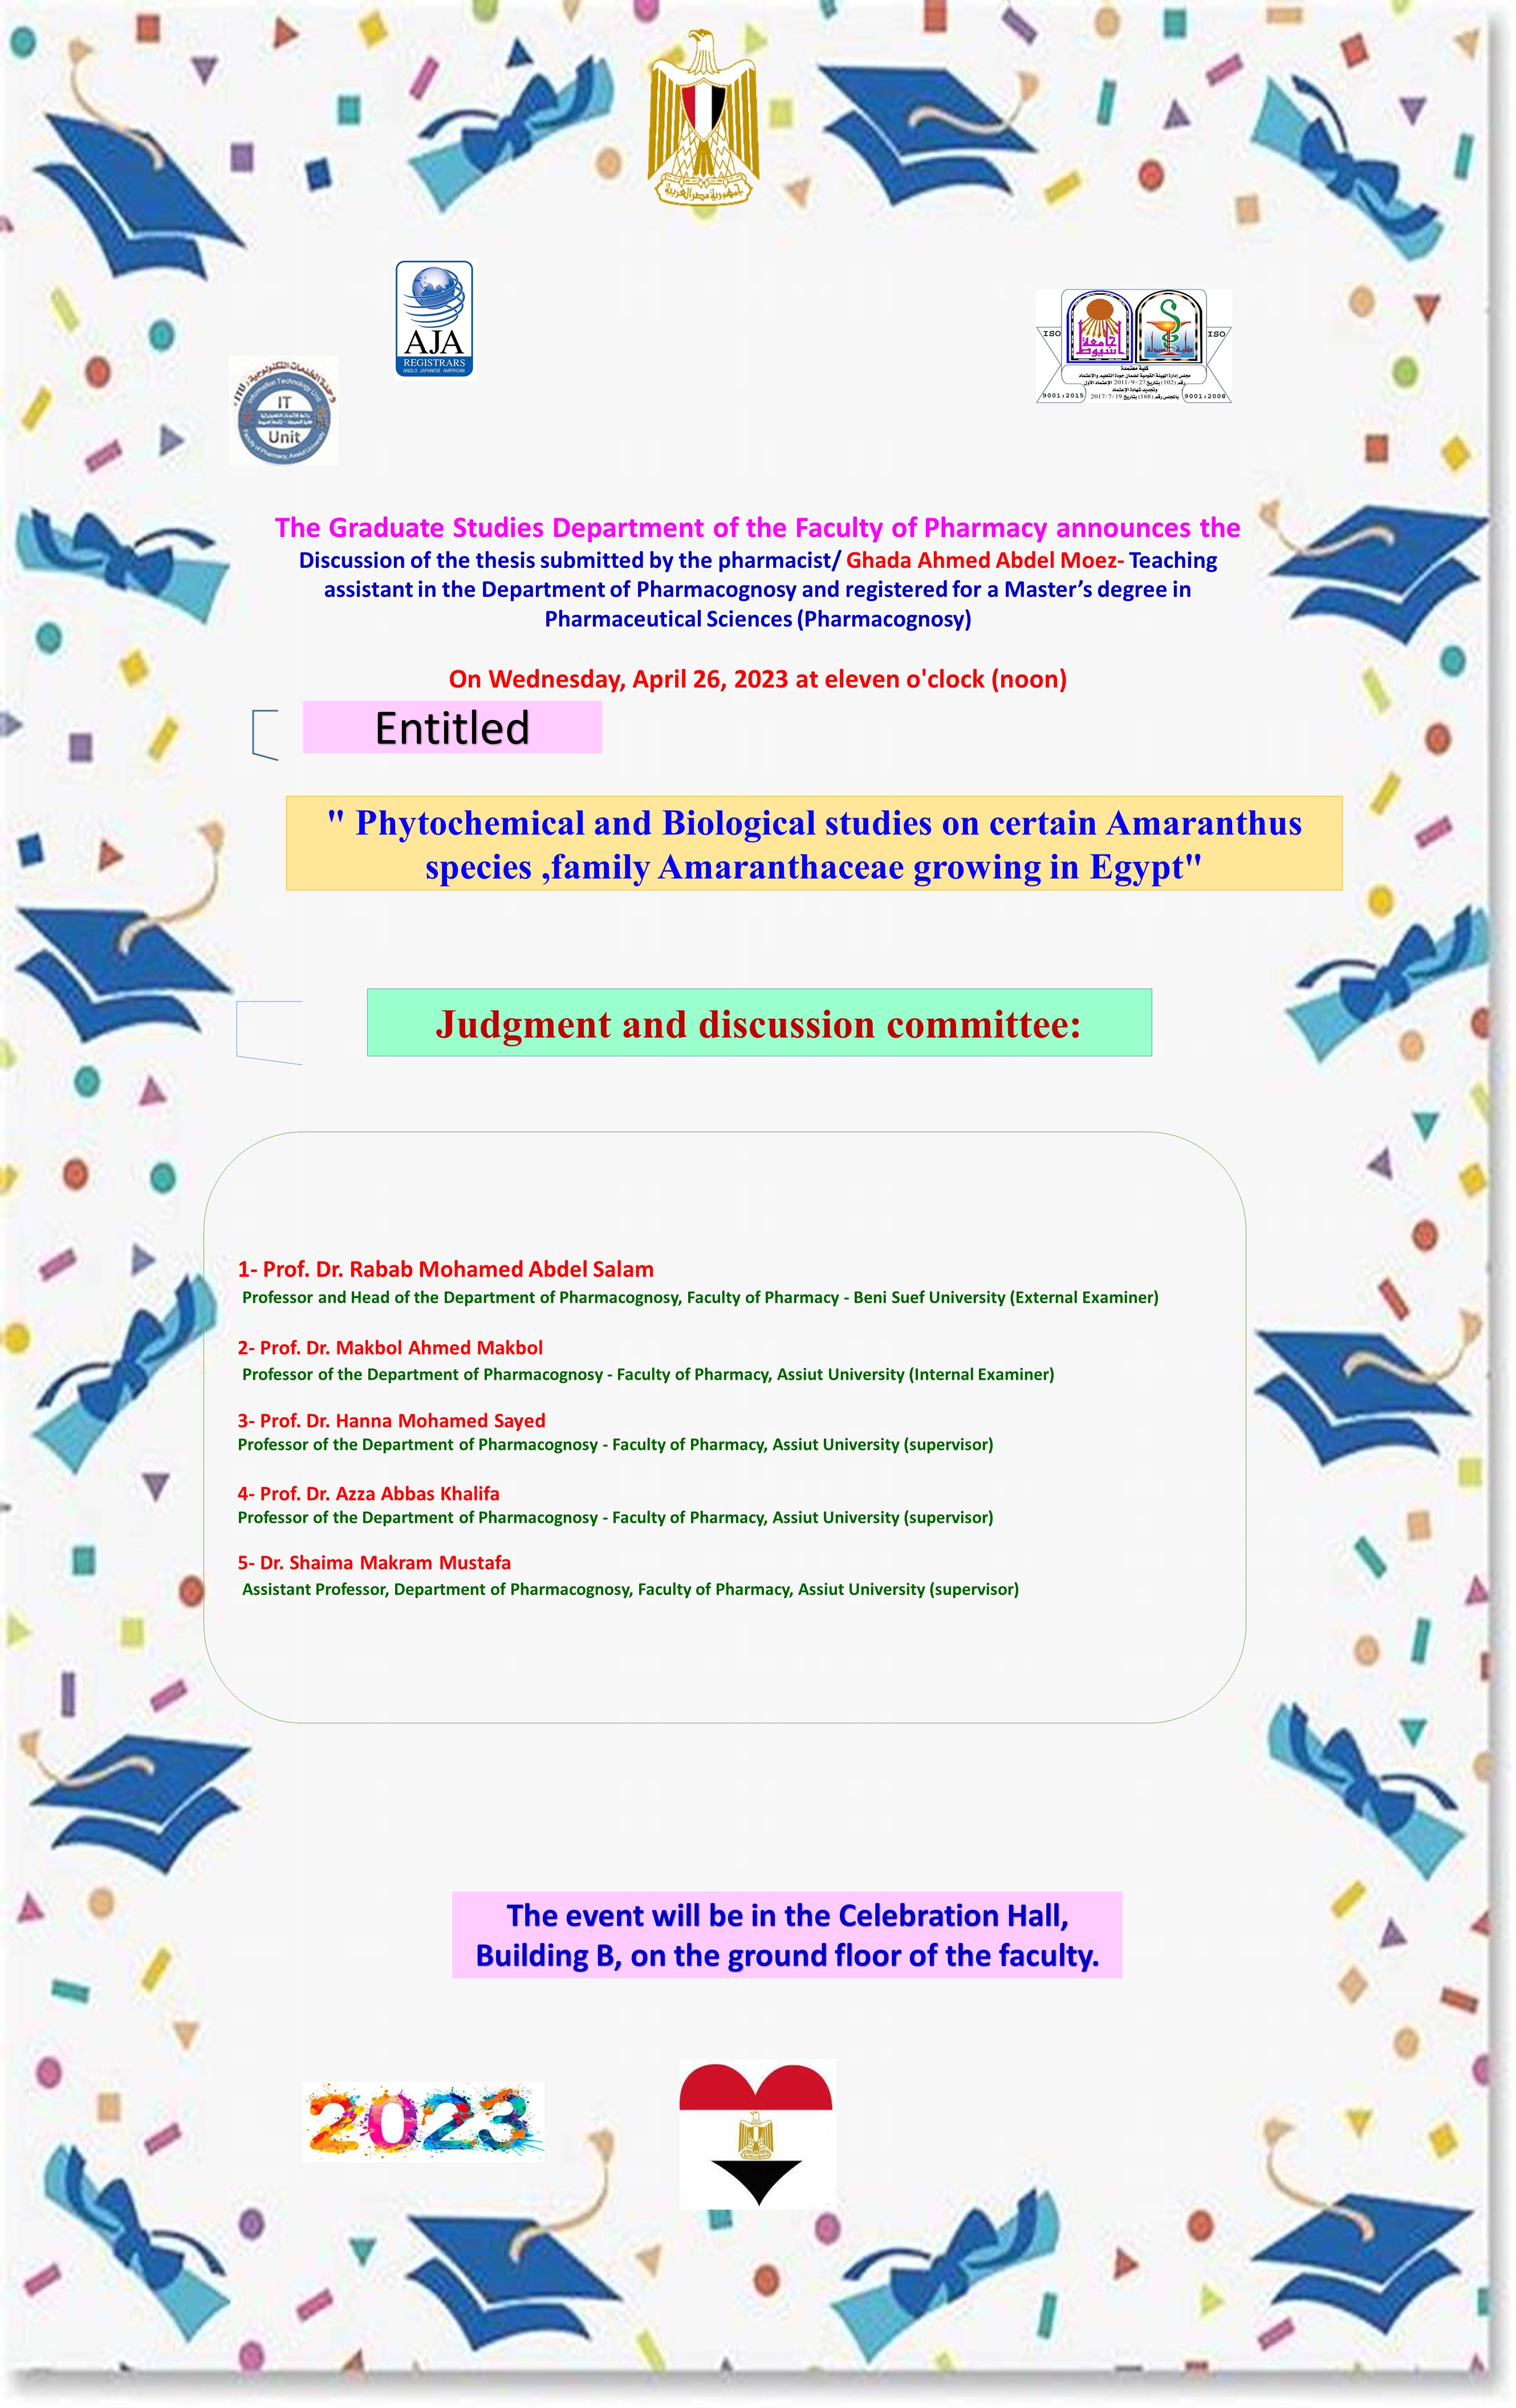 Thesis defense of the pharmacist/ Ghada Ahmed Abdel Moez - Teaching Assistant in the Department of Pharmacognosy - on Wednesday 26 April 2023